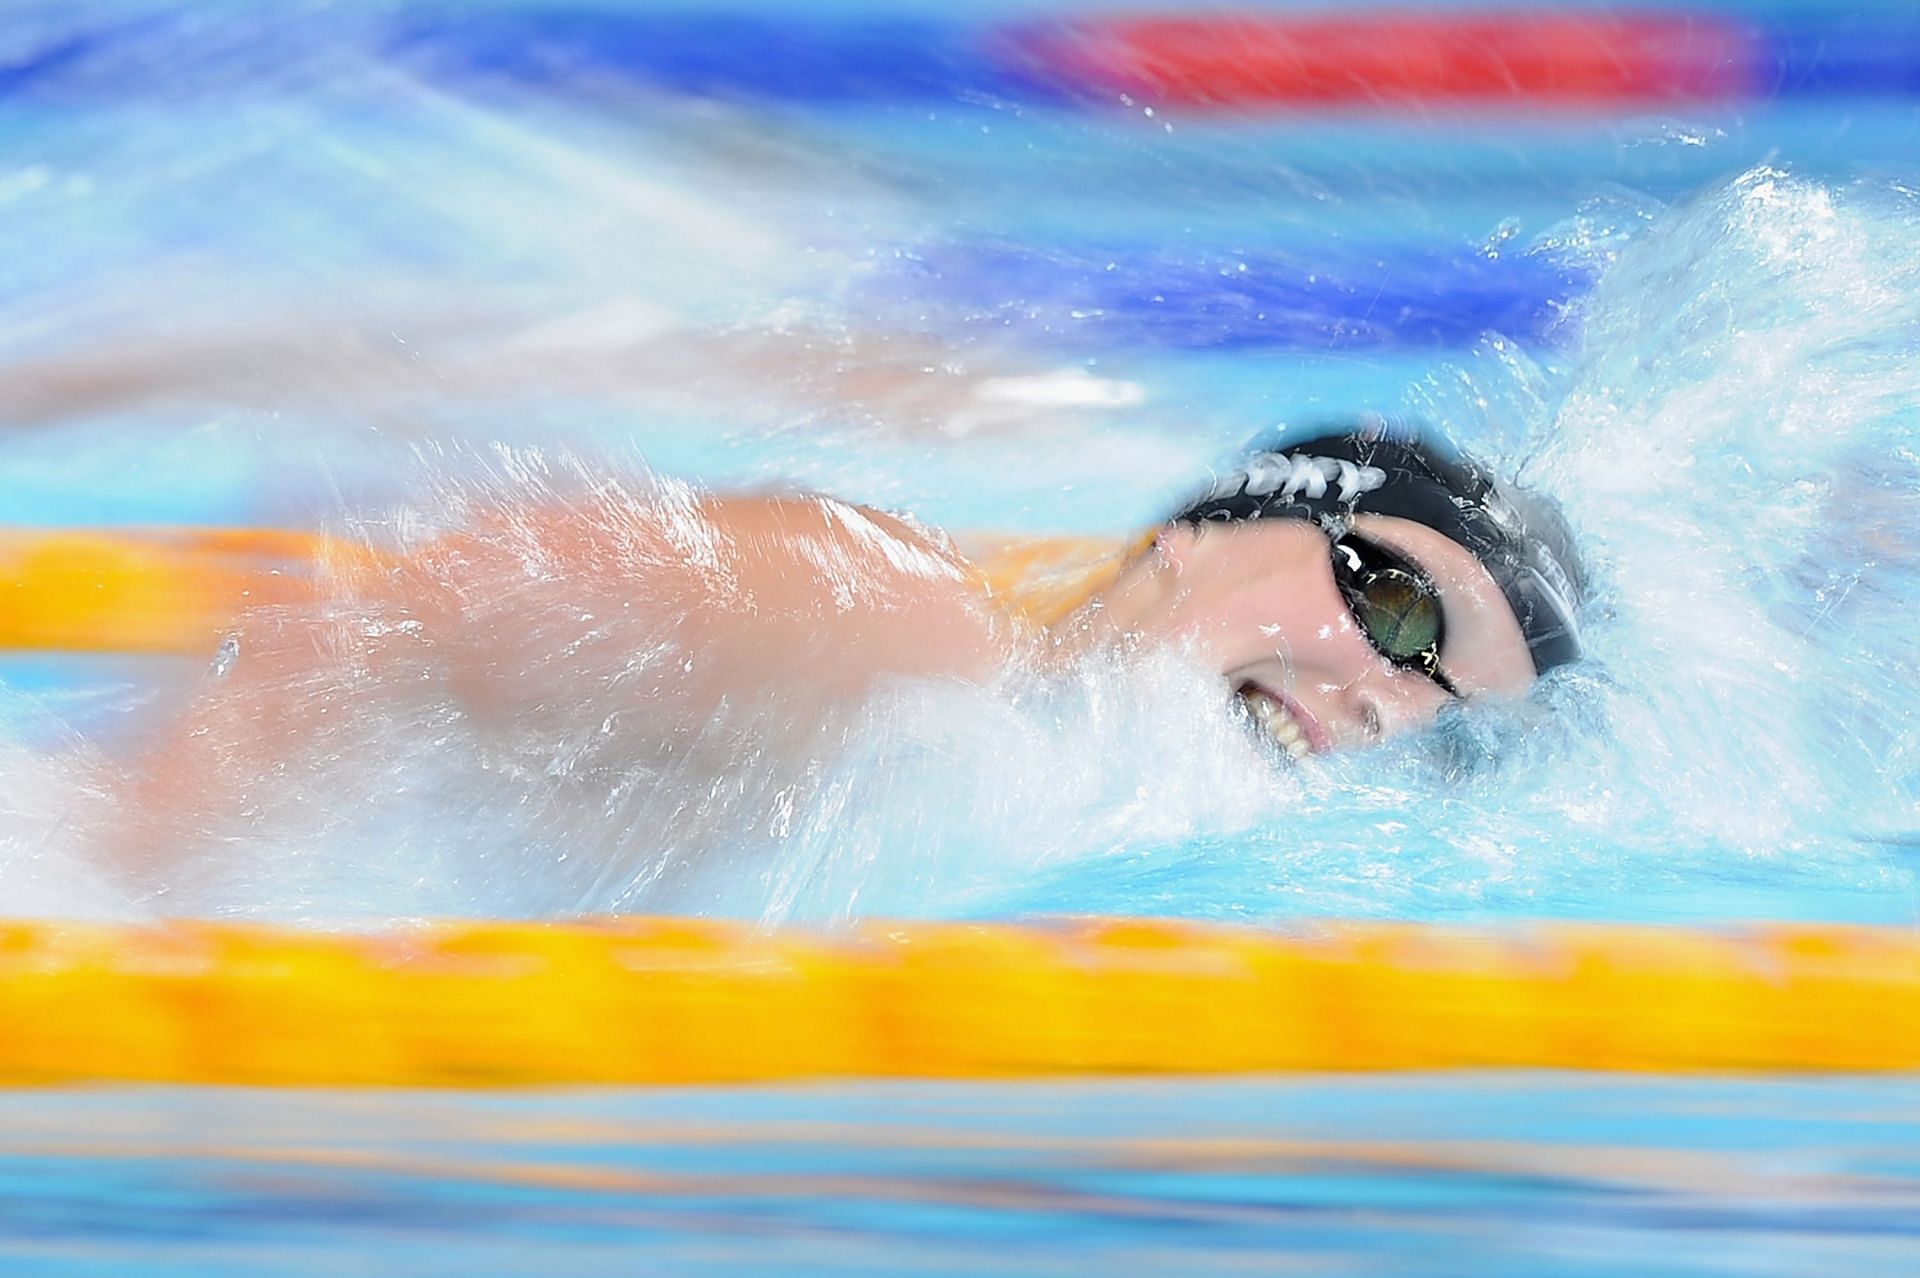 Katie Ledecky of the United States swims in the Women's 1500m Freestyle Final of the 2014 Pan Pacific Championships (Photo by Matt Roberts/Getty Images)